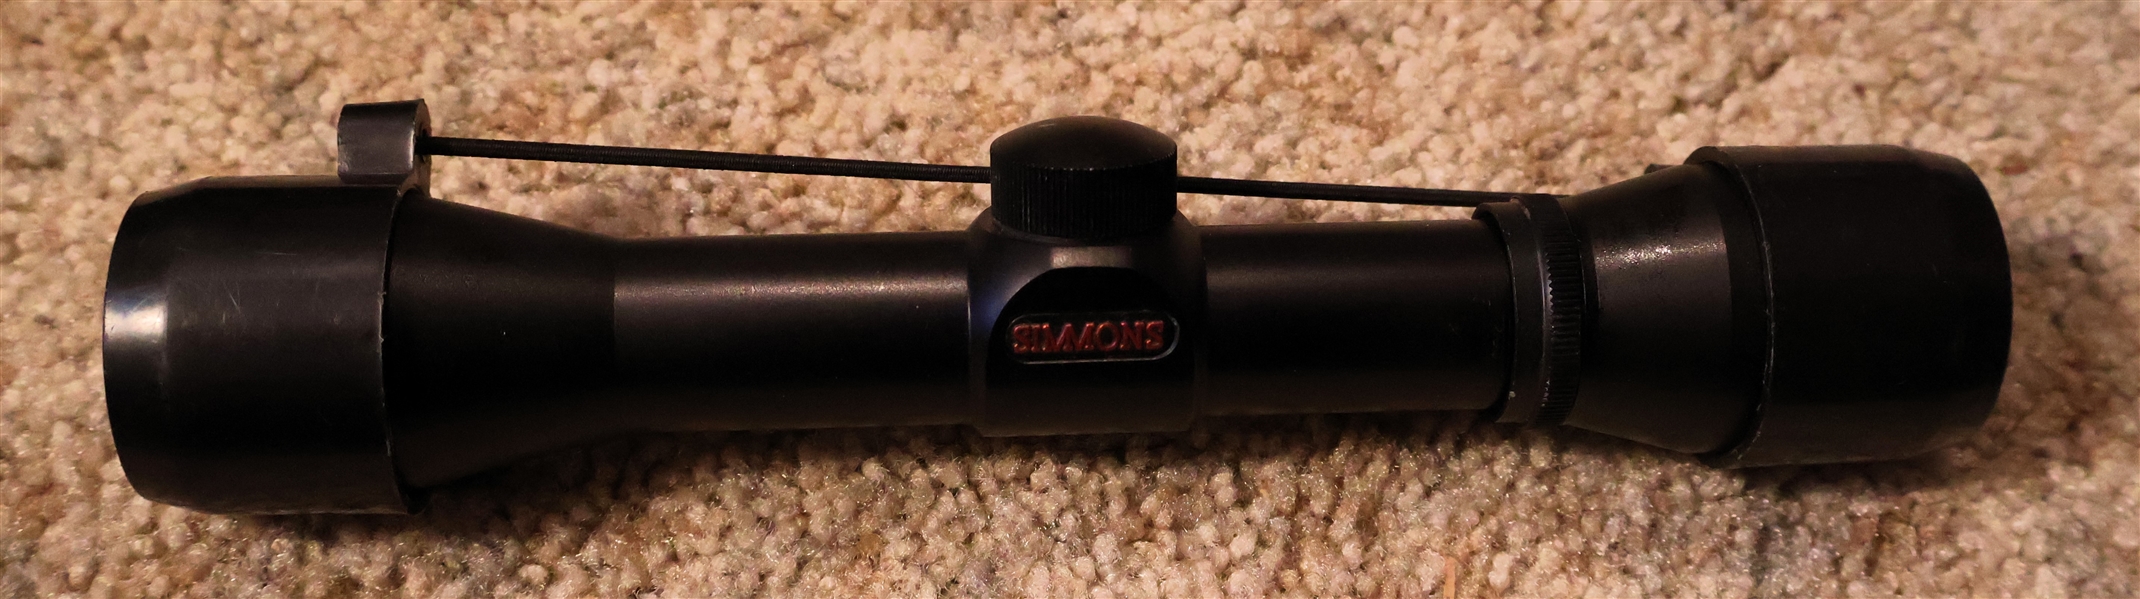 Simmons Model 21004 Scope with Lens Covers